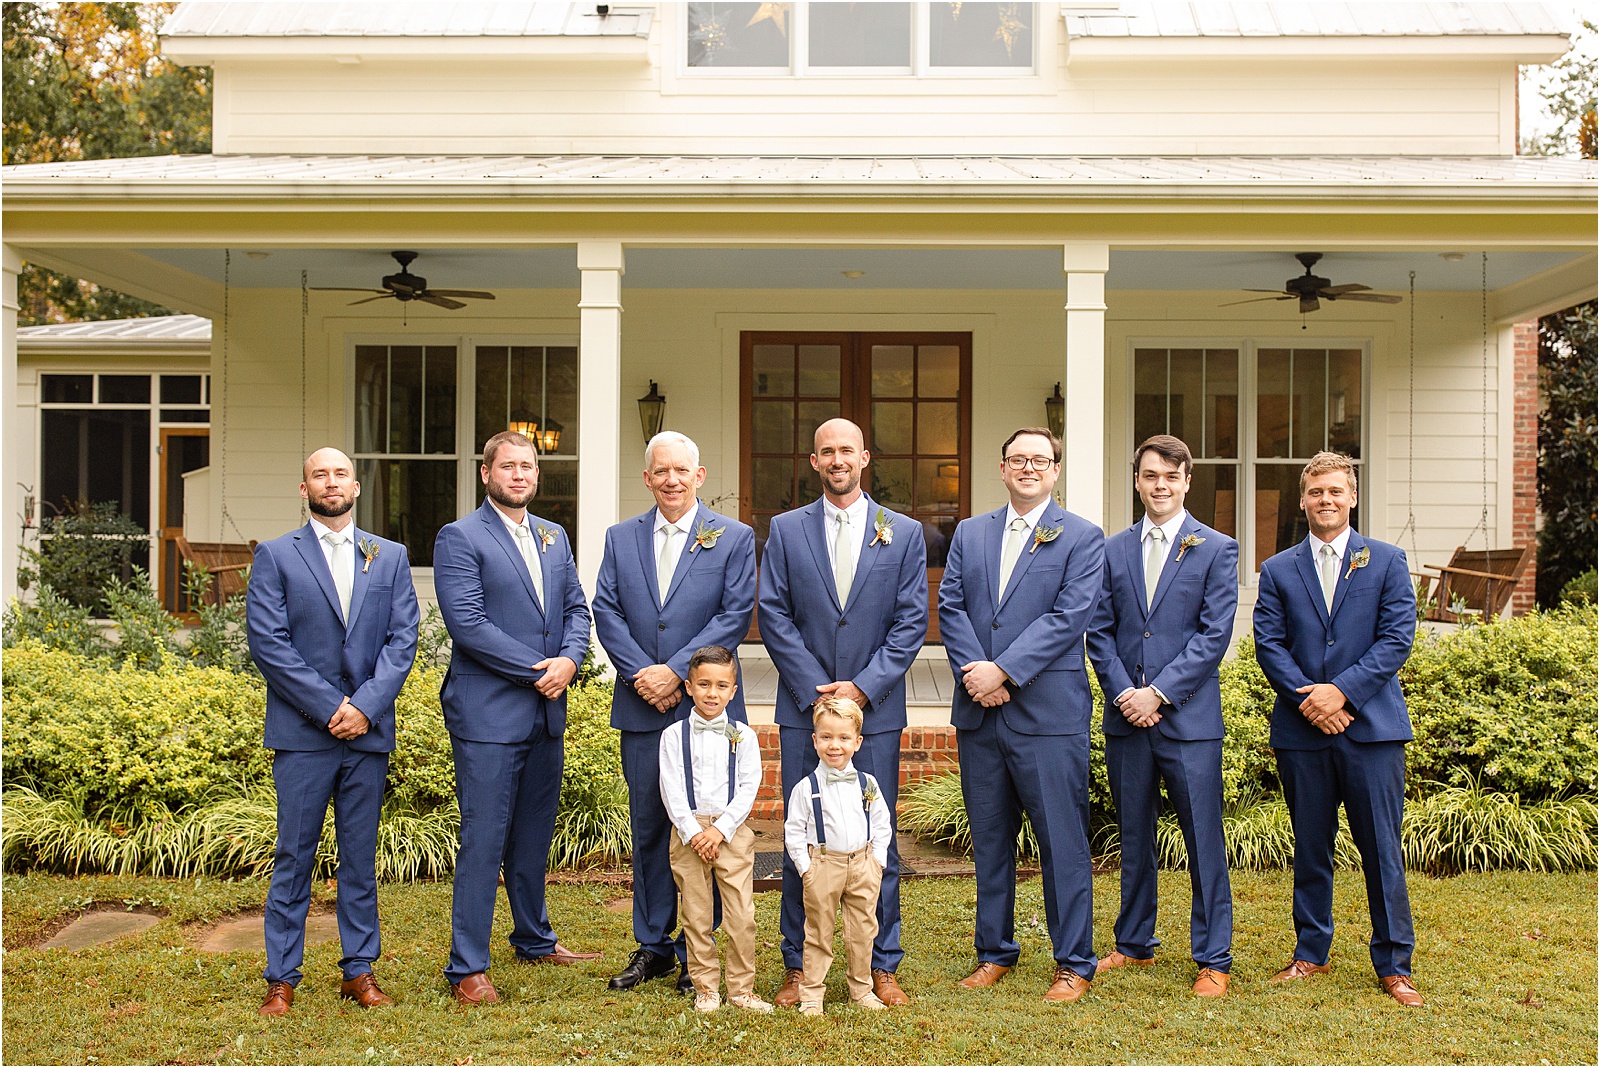 Line of men in dark blue suits pose in front of a house